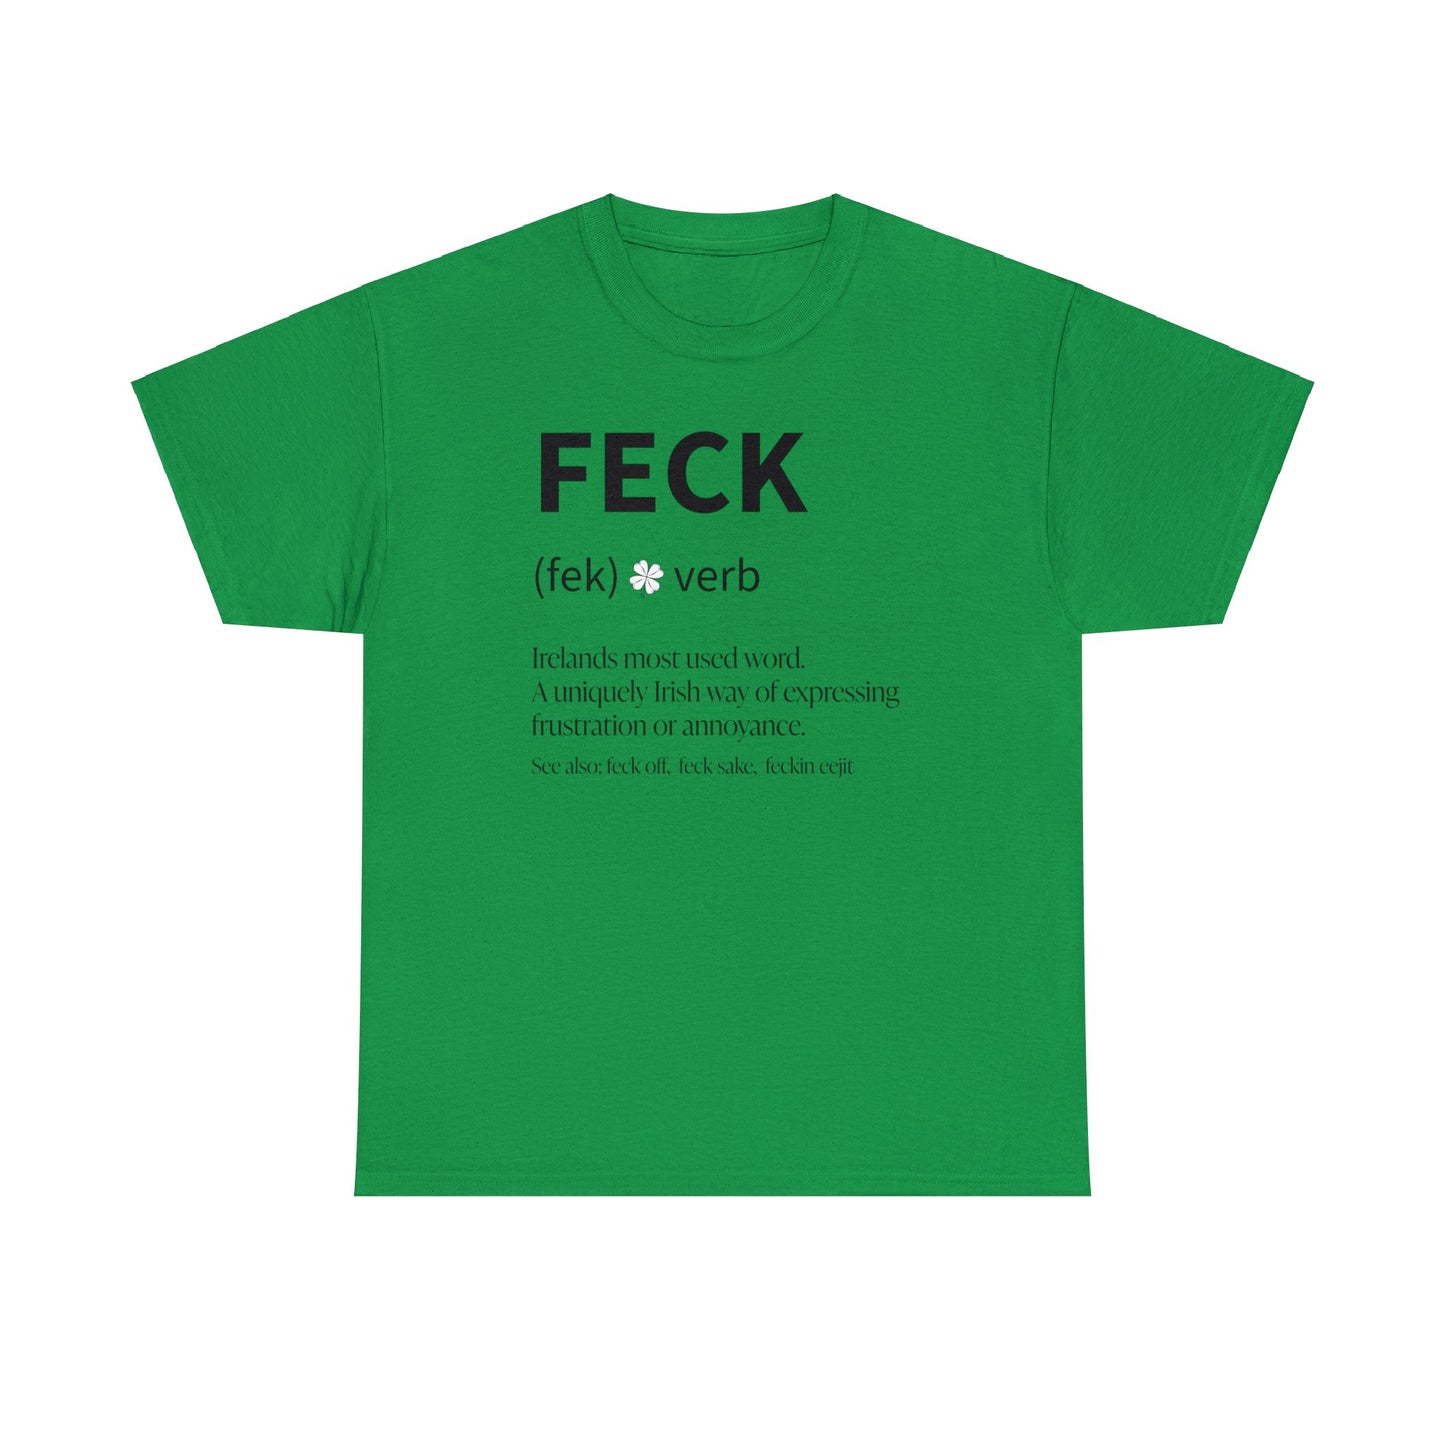 Feck T-Shirt For Feck Definition T Shirt For Irish Sarcasm TShirt For St. Paddy's Day Shirt